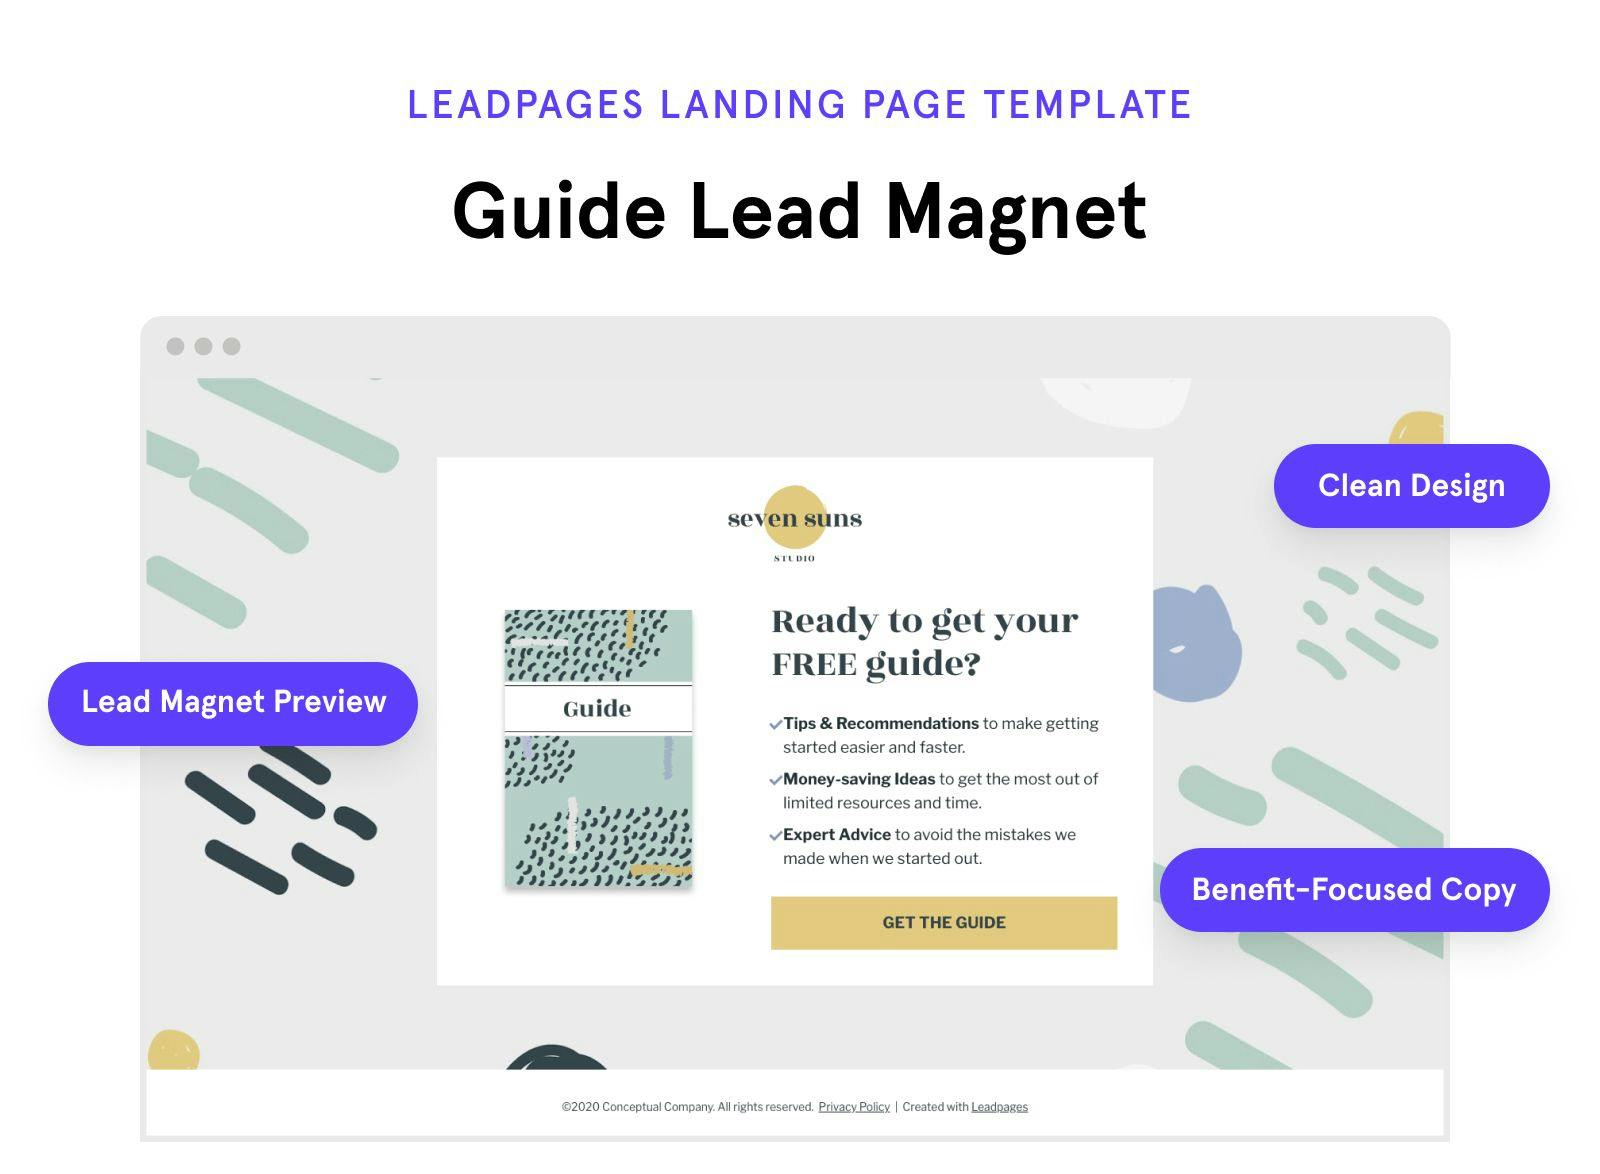 Free guide lead magnet landing page template